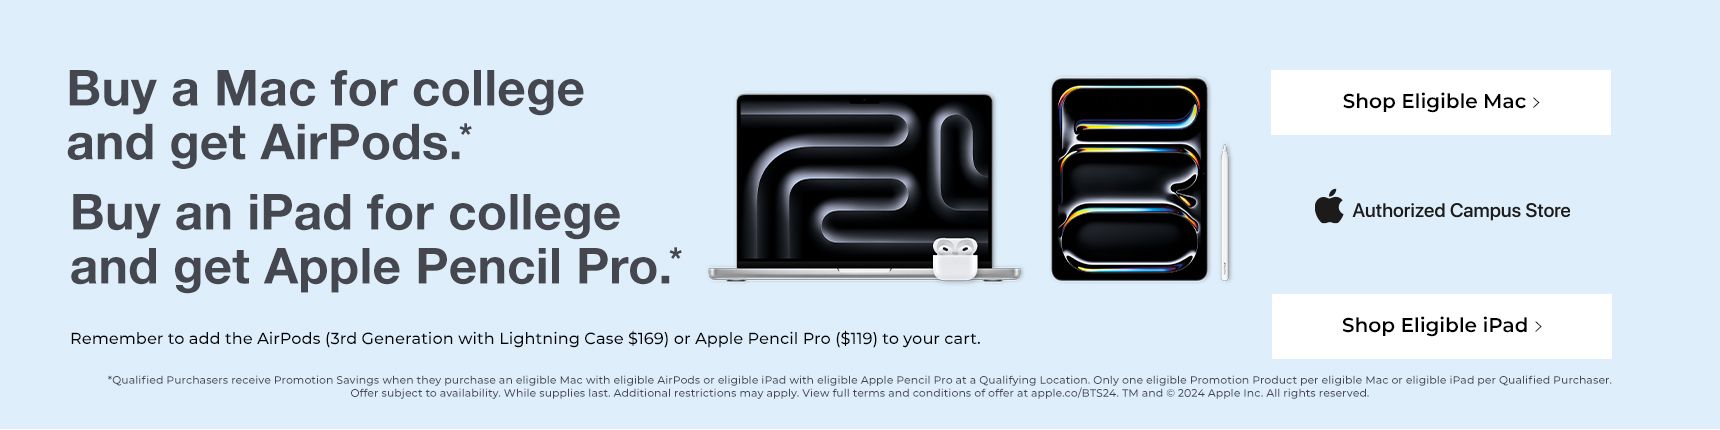 Buy a Mac for college and get AirPods. Buy an iPad for college and get Apple Pencil Pro. 